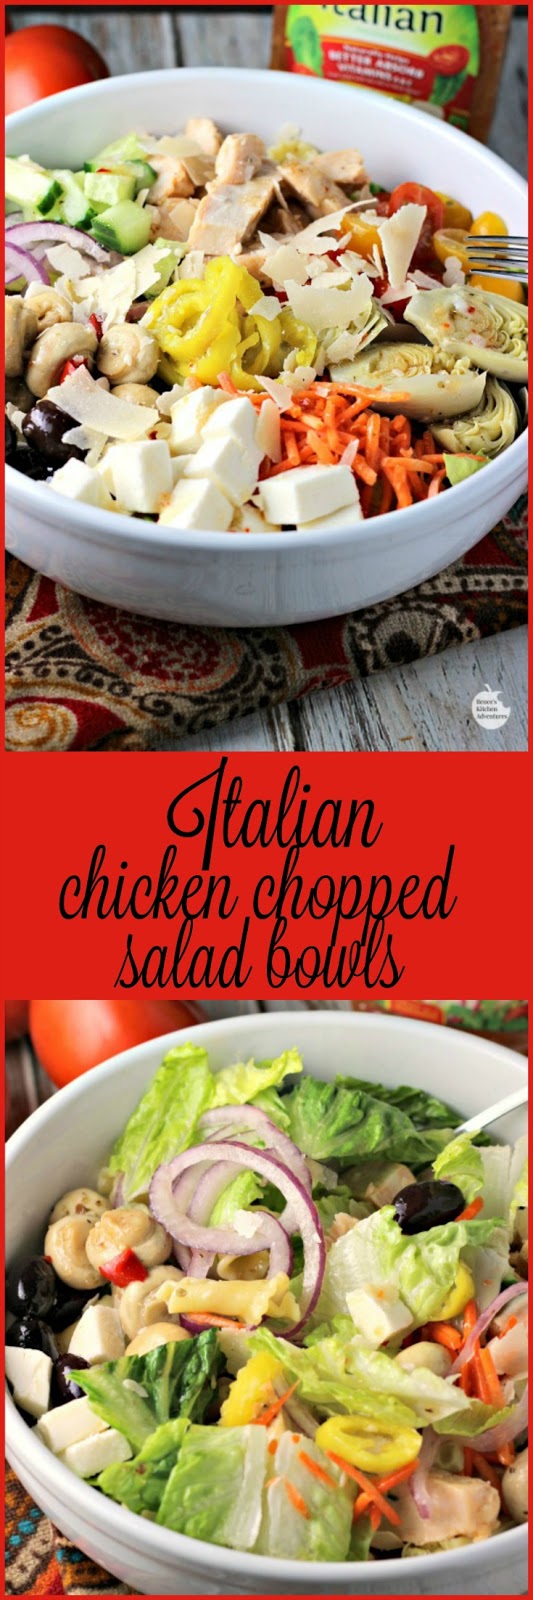 [ad] Italian Chicken Chopped Salad Bowls | by Renee's Kitchen Adventures - Quick and easy dinner solution recipe for a healthy meal with chicken, veggies and pasta #SimplySatisfyingSalads #EverydayEffortless